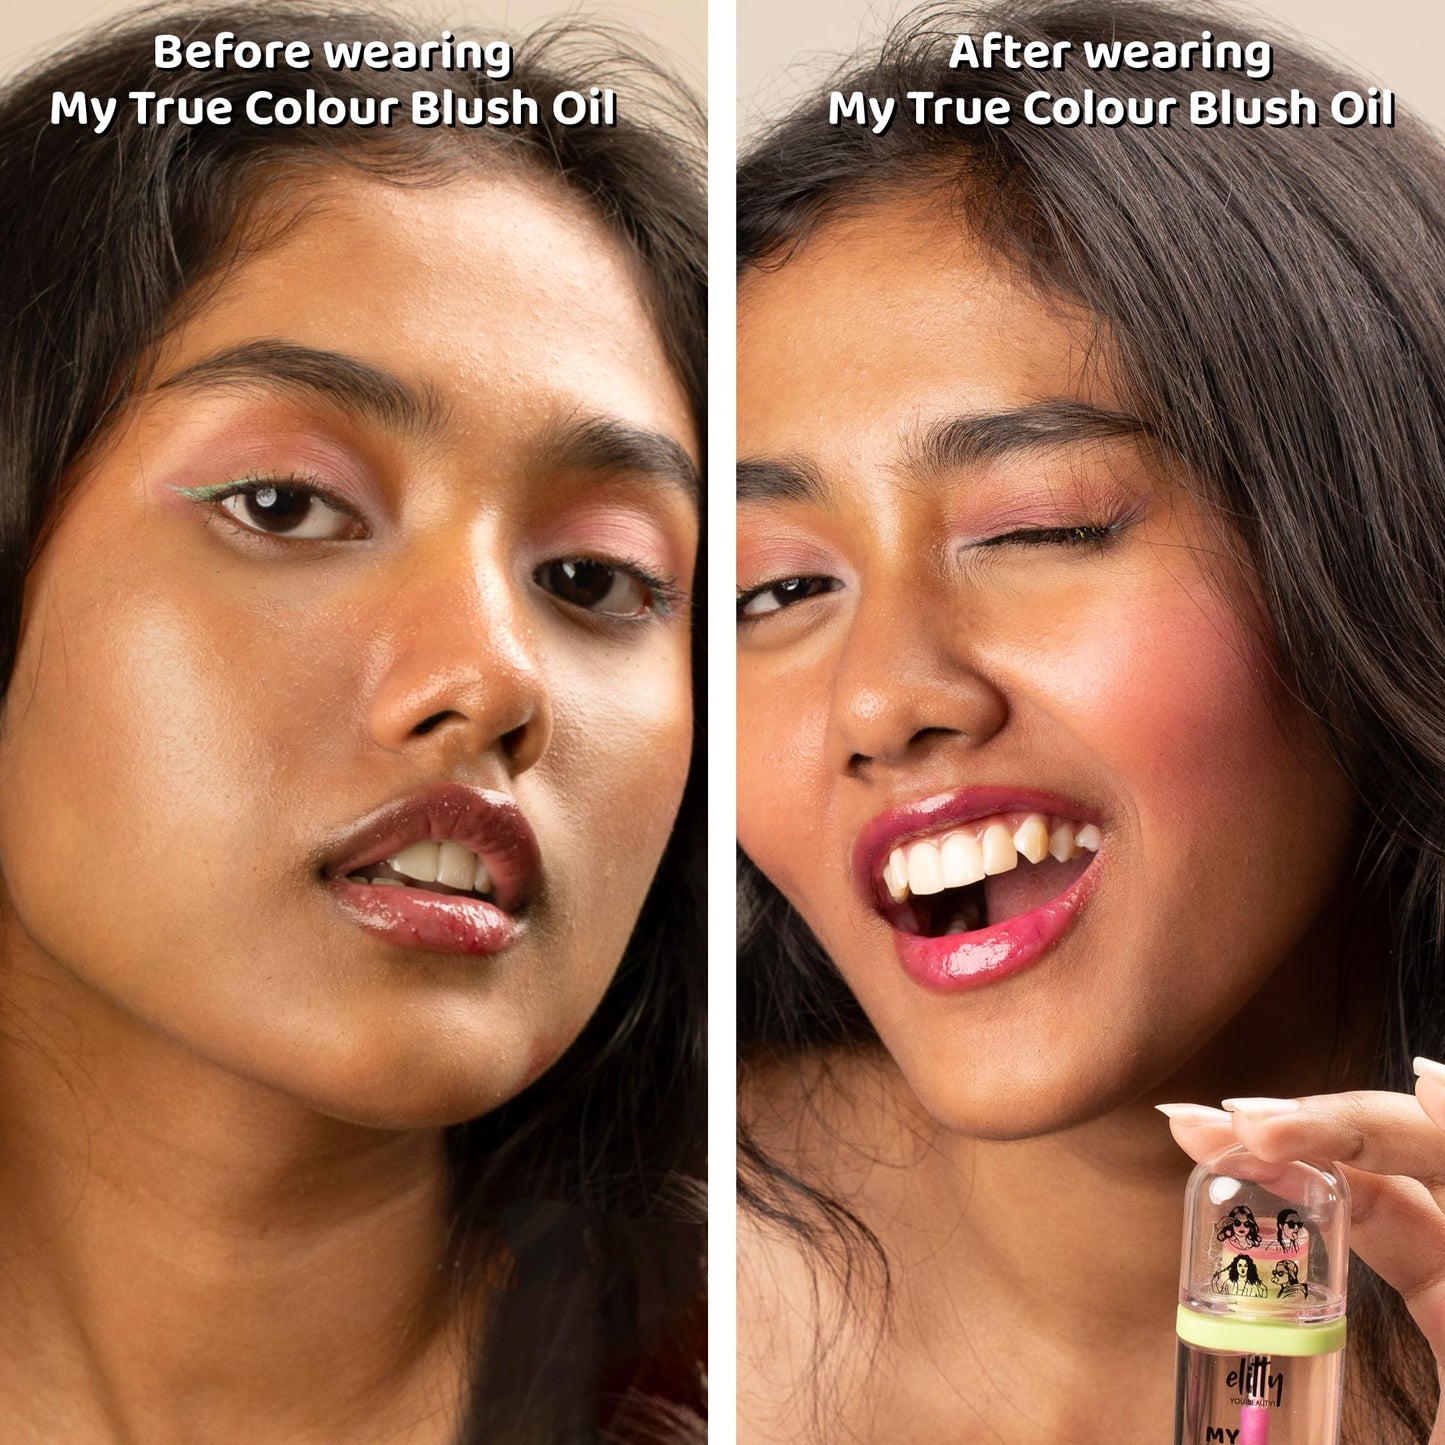 Elitty pH-Adaptive Lip and Cheek Blush Oil - Enriched With Vitamin E (7ml) for Effortlessly Radiant Lip and Cheeks.